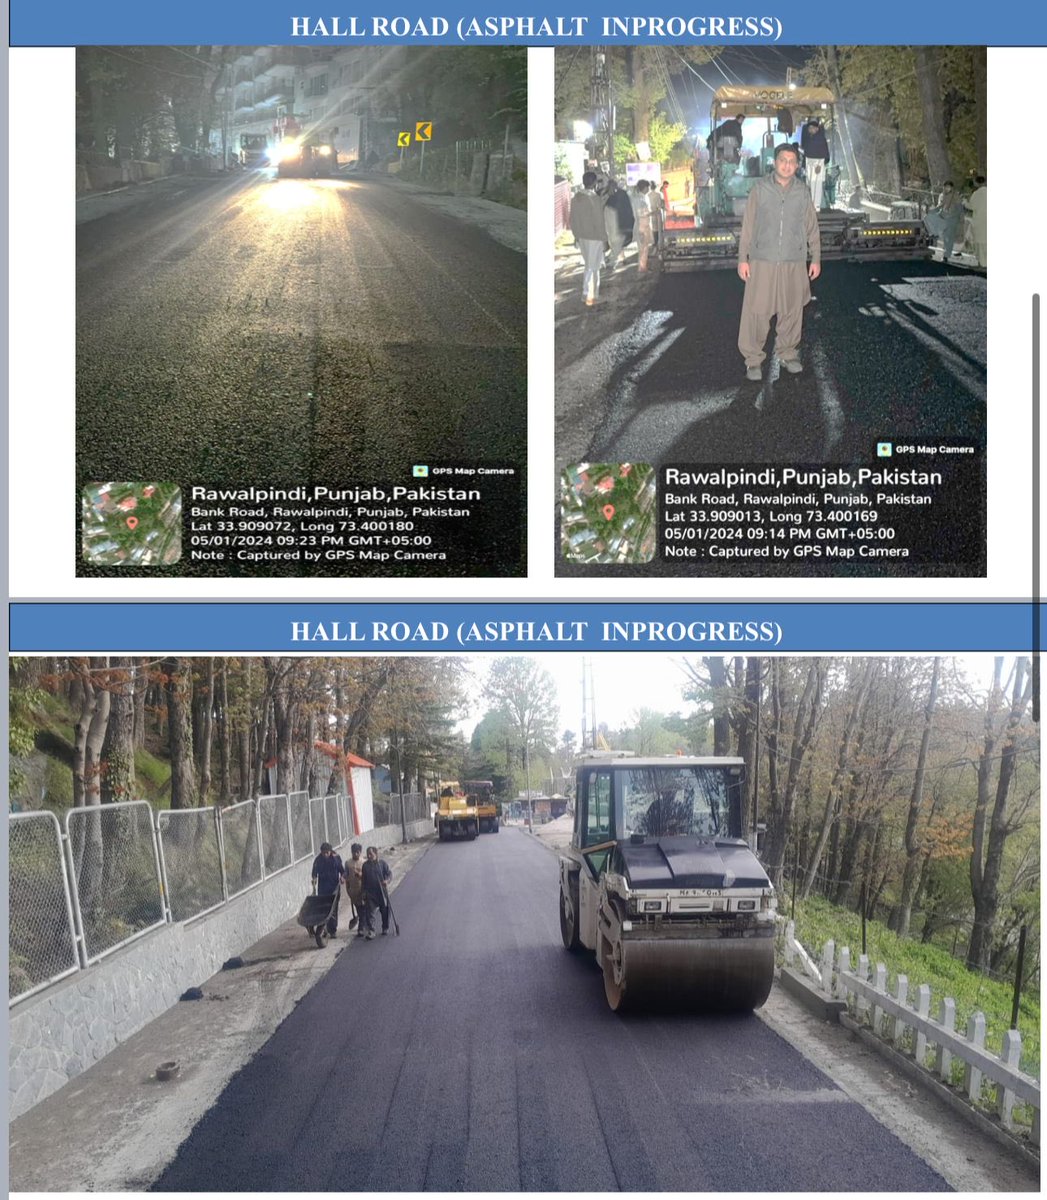 Murree: Roads being restored and rehabilitated.